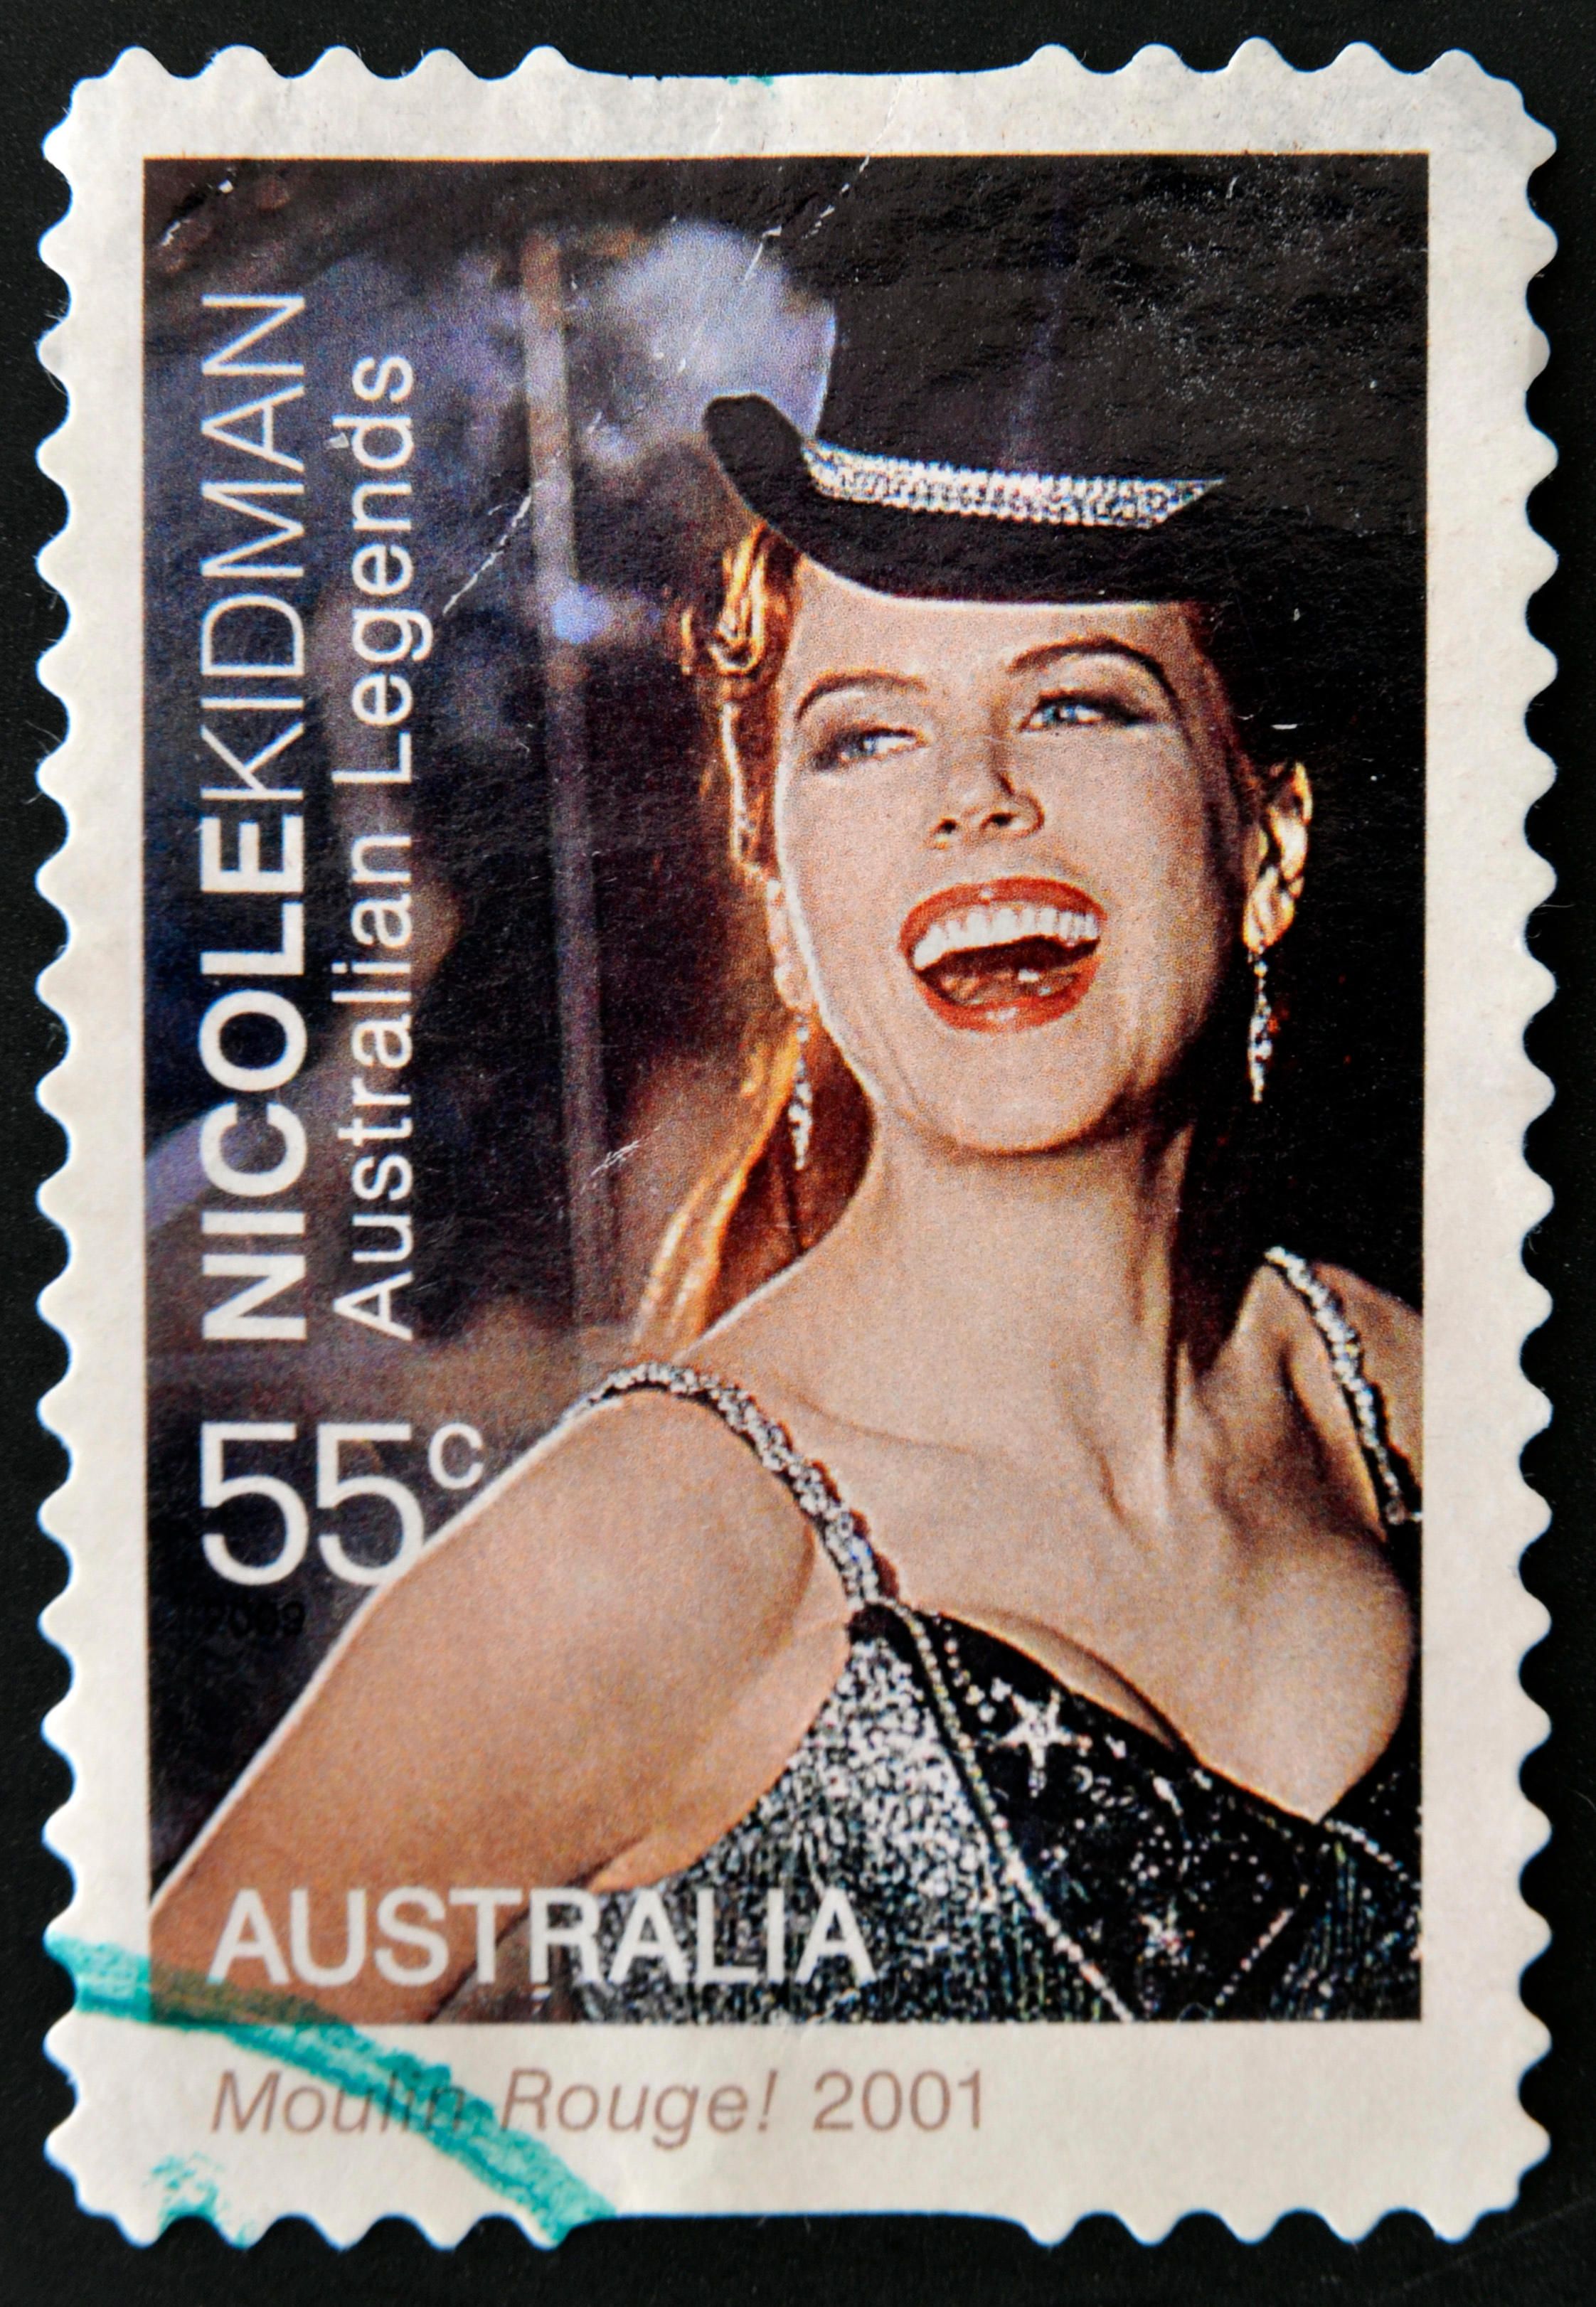 A stamp printed in Australia shows portrait of Nicole Kidman in the movie Moulin Rouge